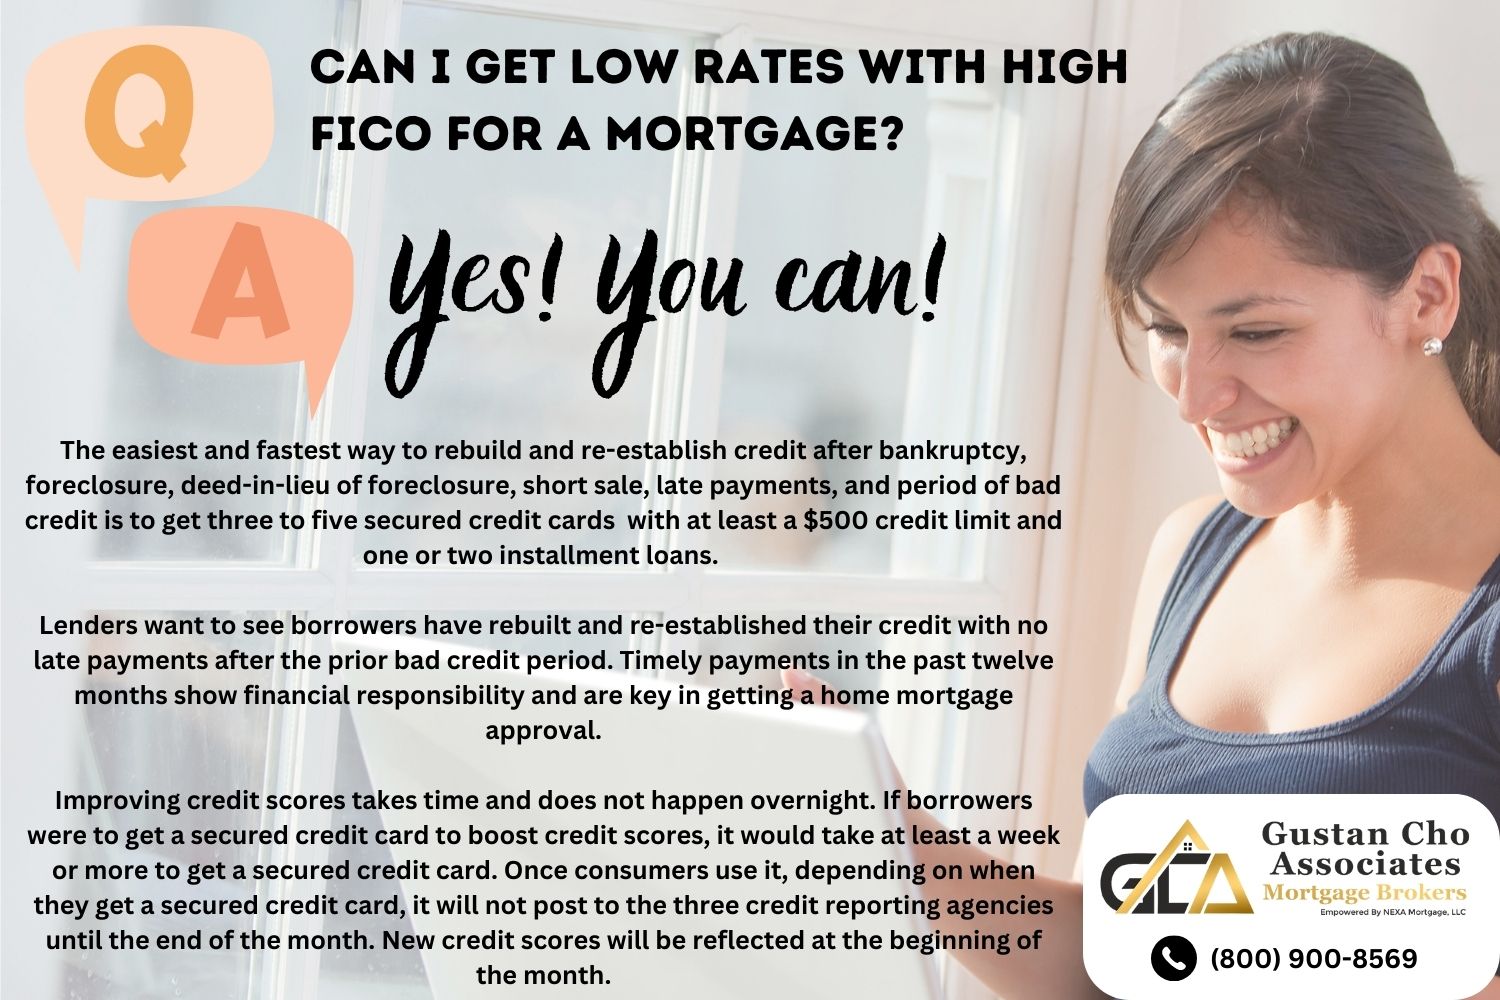 Can I Get Low Rates With High FICO For a Mortgage